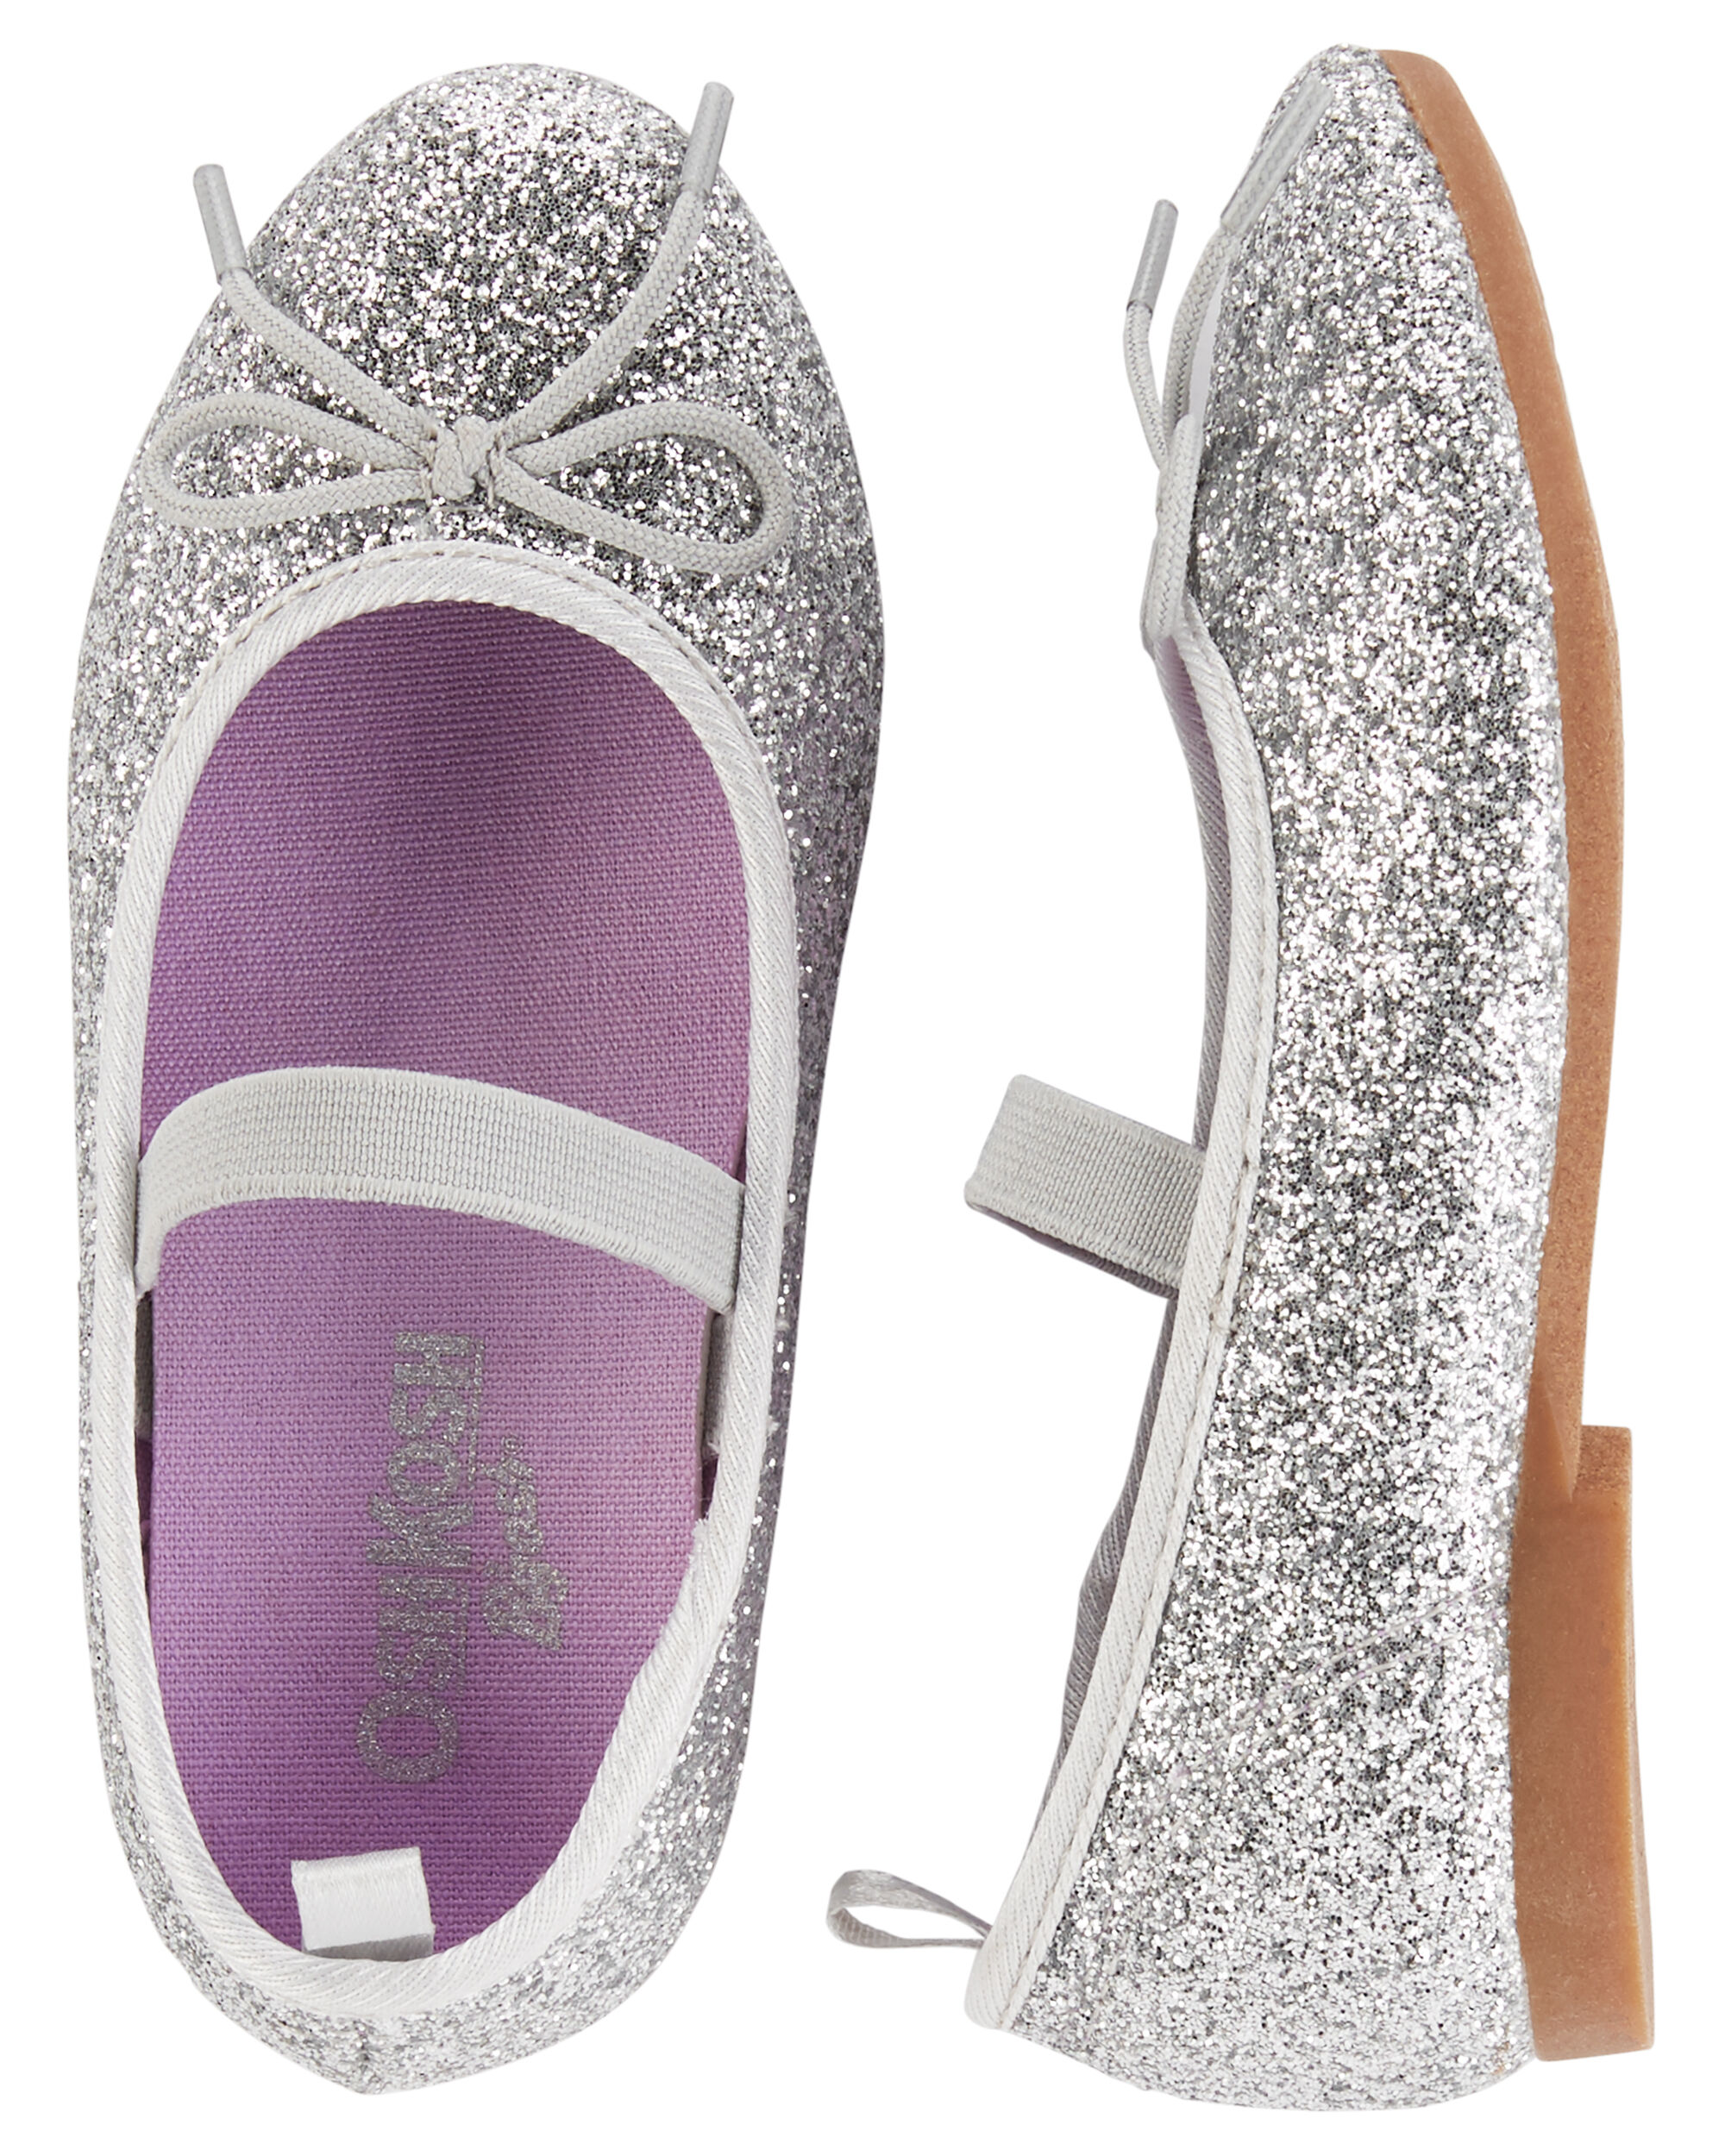 New Oshkosh Sparkle Multiple Colors Flats shoes girls toddler and kid 7,12